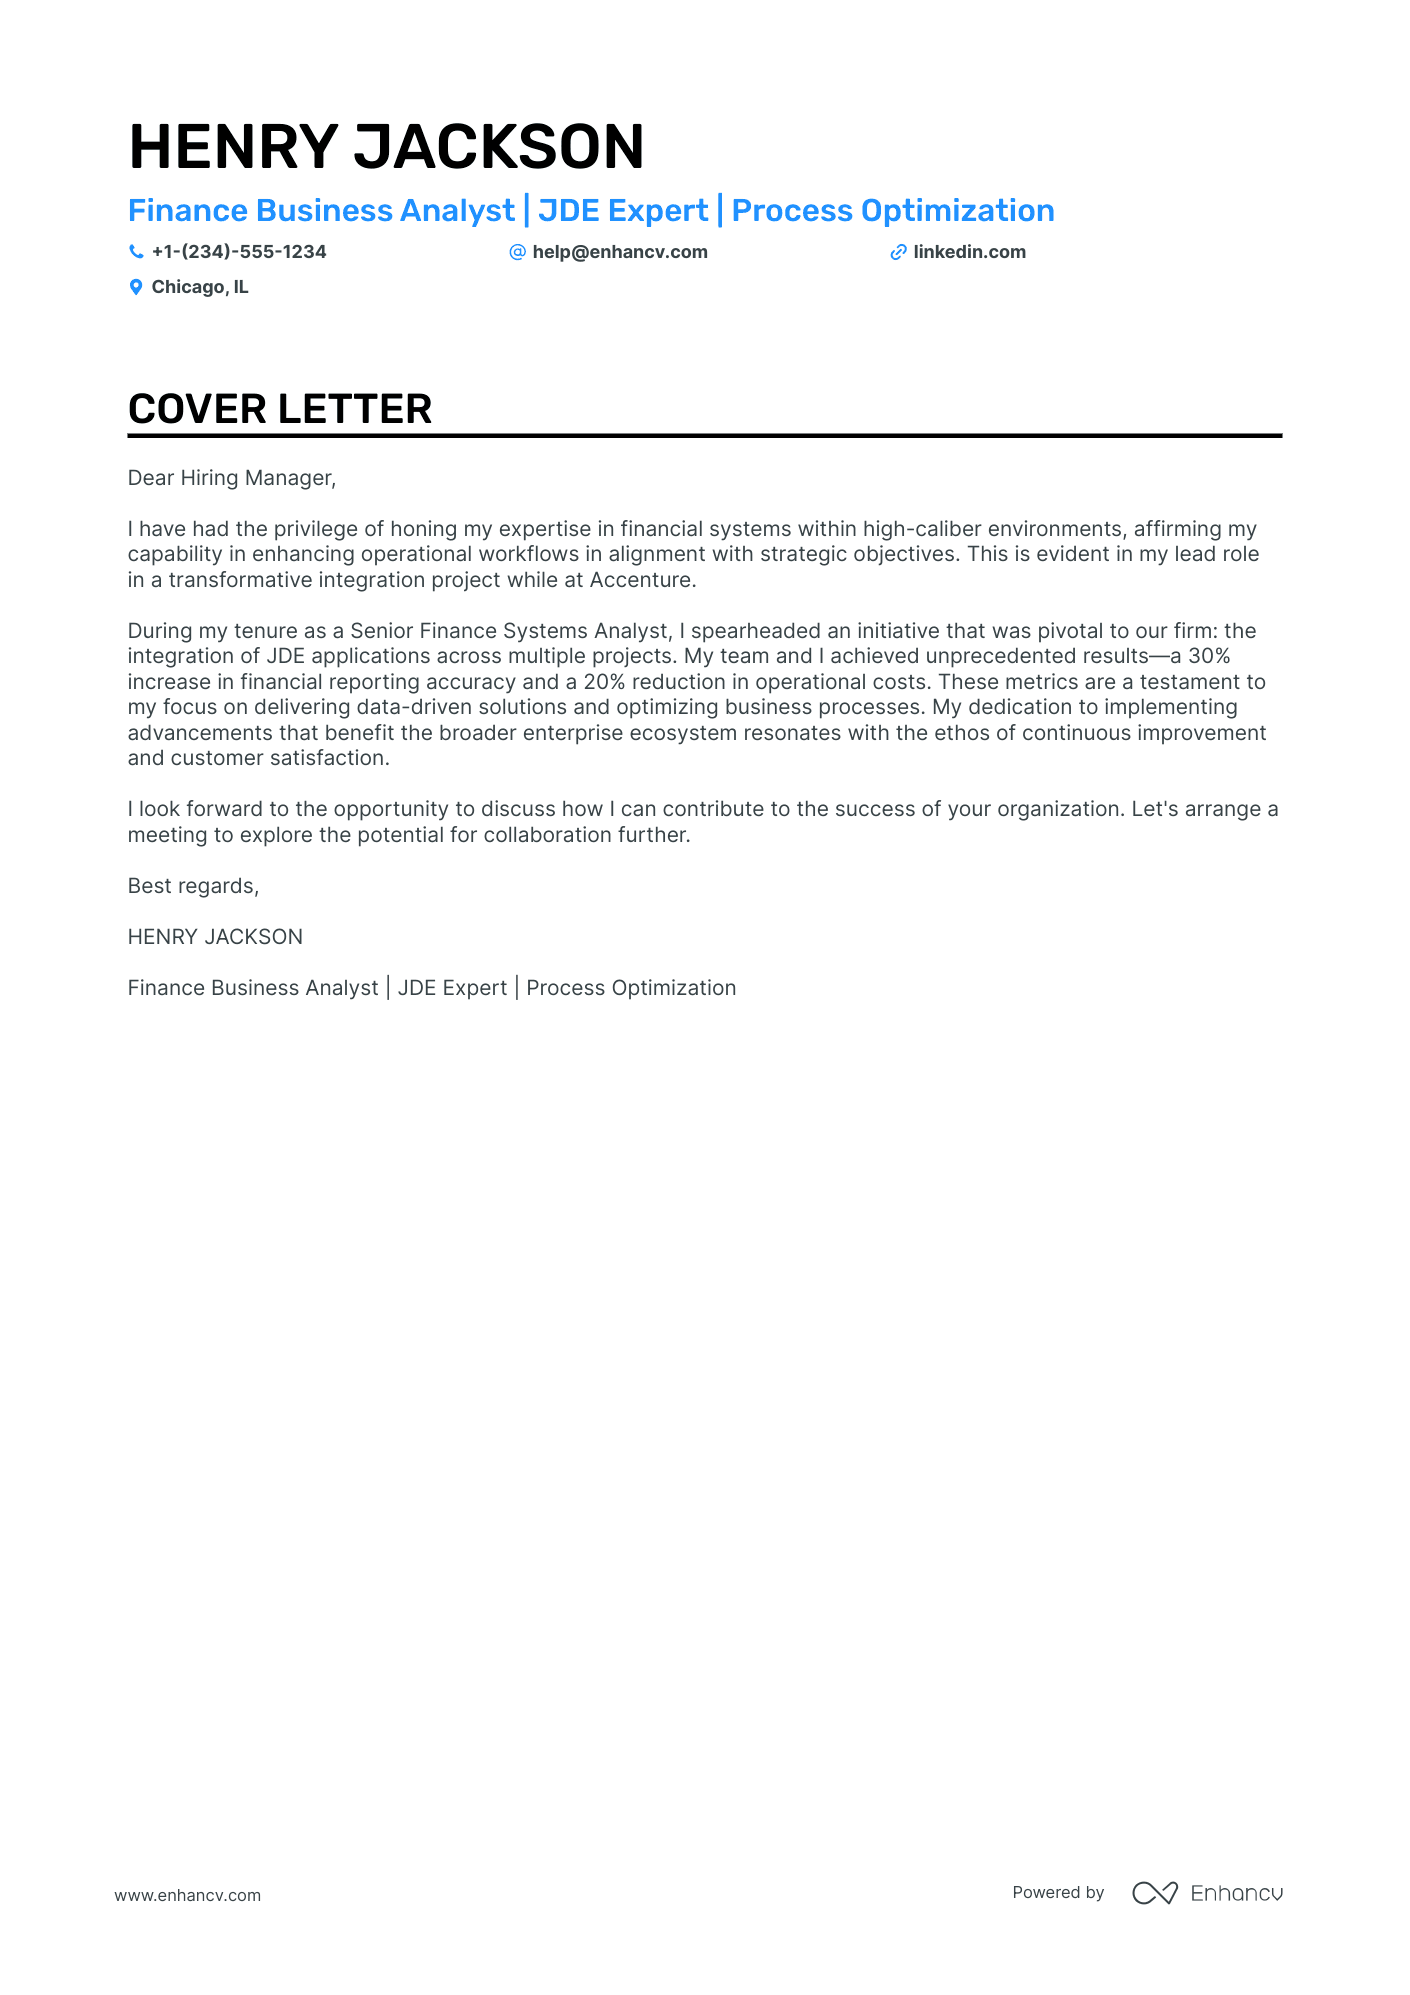 Finance Business Analyst cover letter